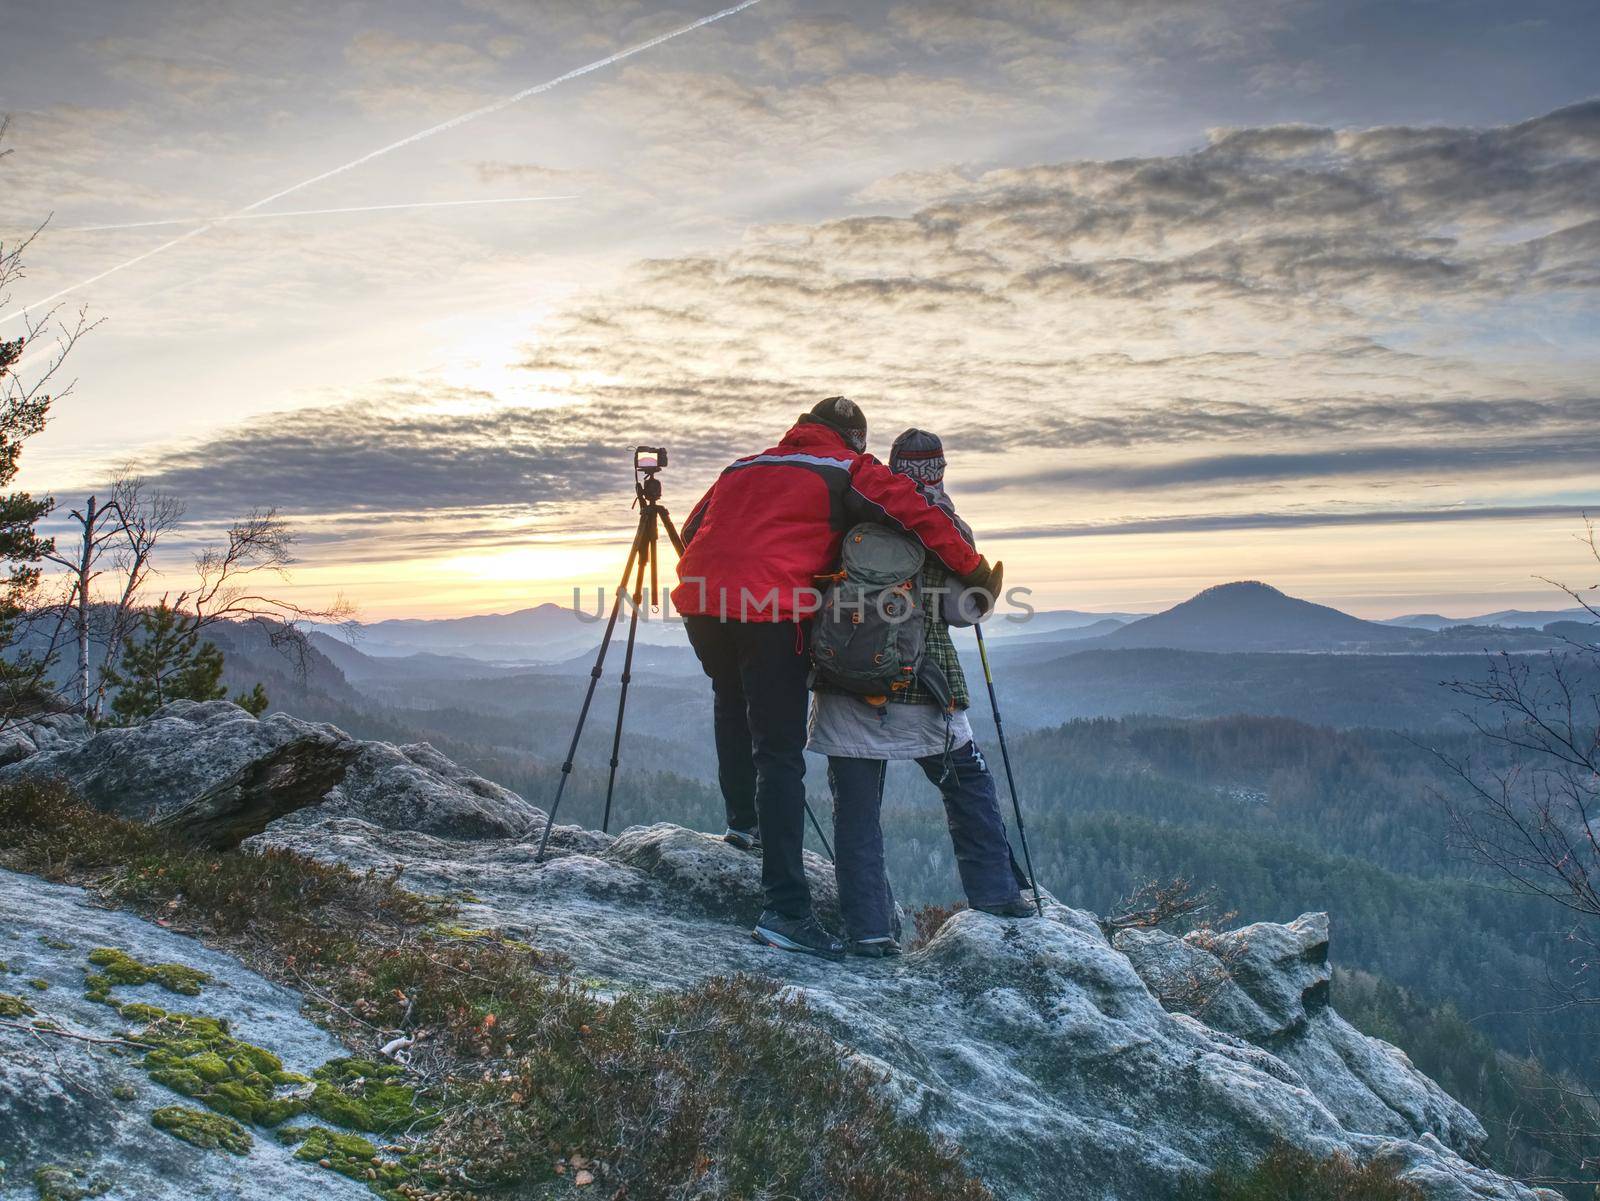 Two wildlife photographers at tripod with set  shinning camera by rdonar2